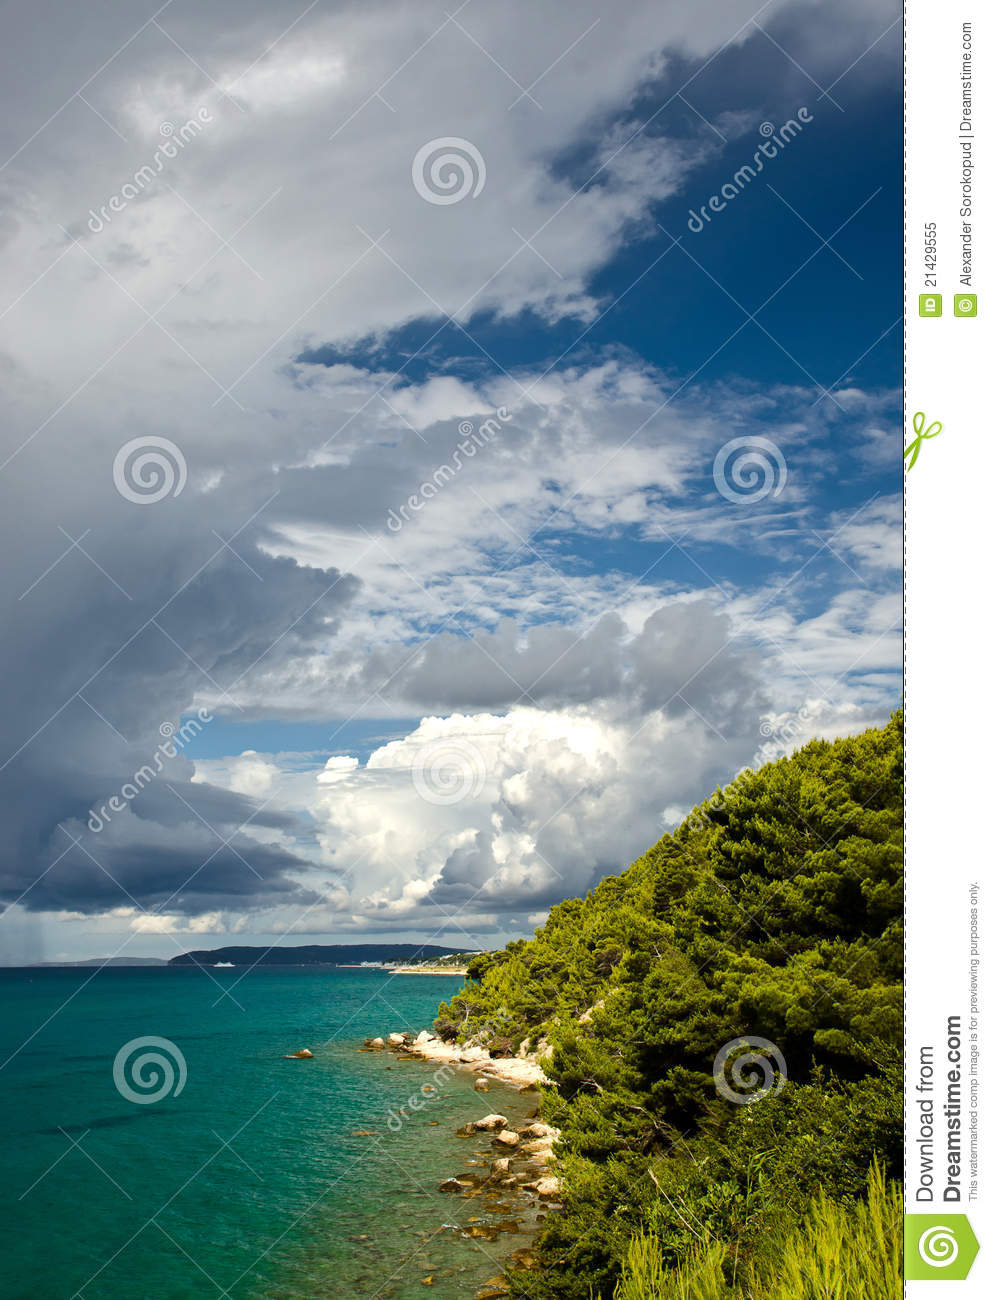 Stormy Weather With Dark Clouds Royalty Free Stock Photo   Image